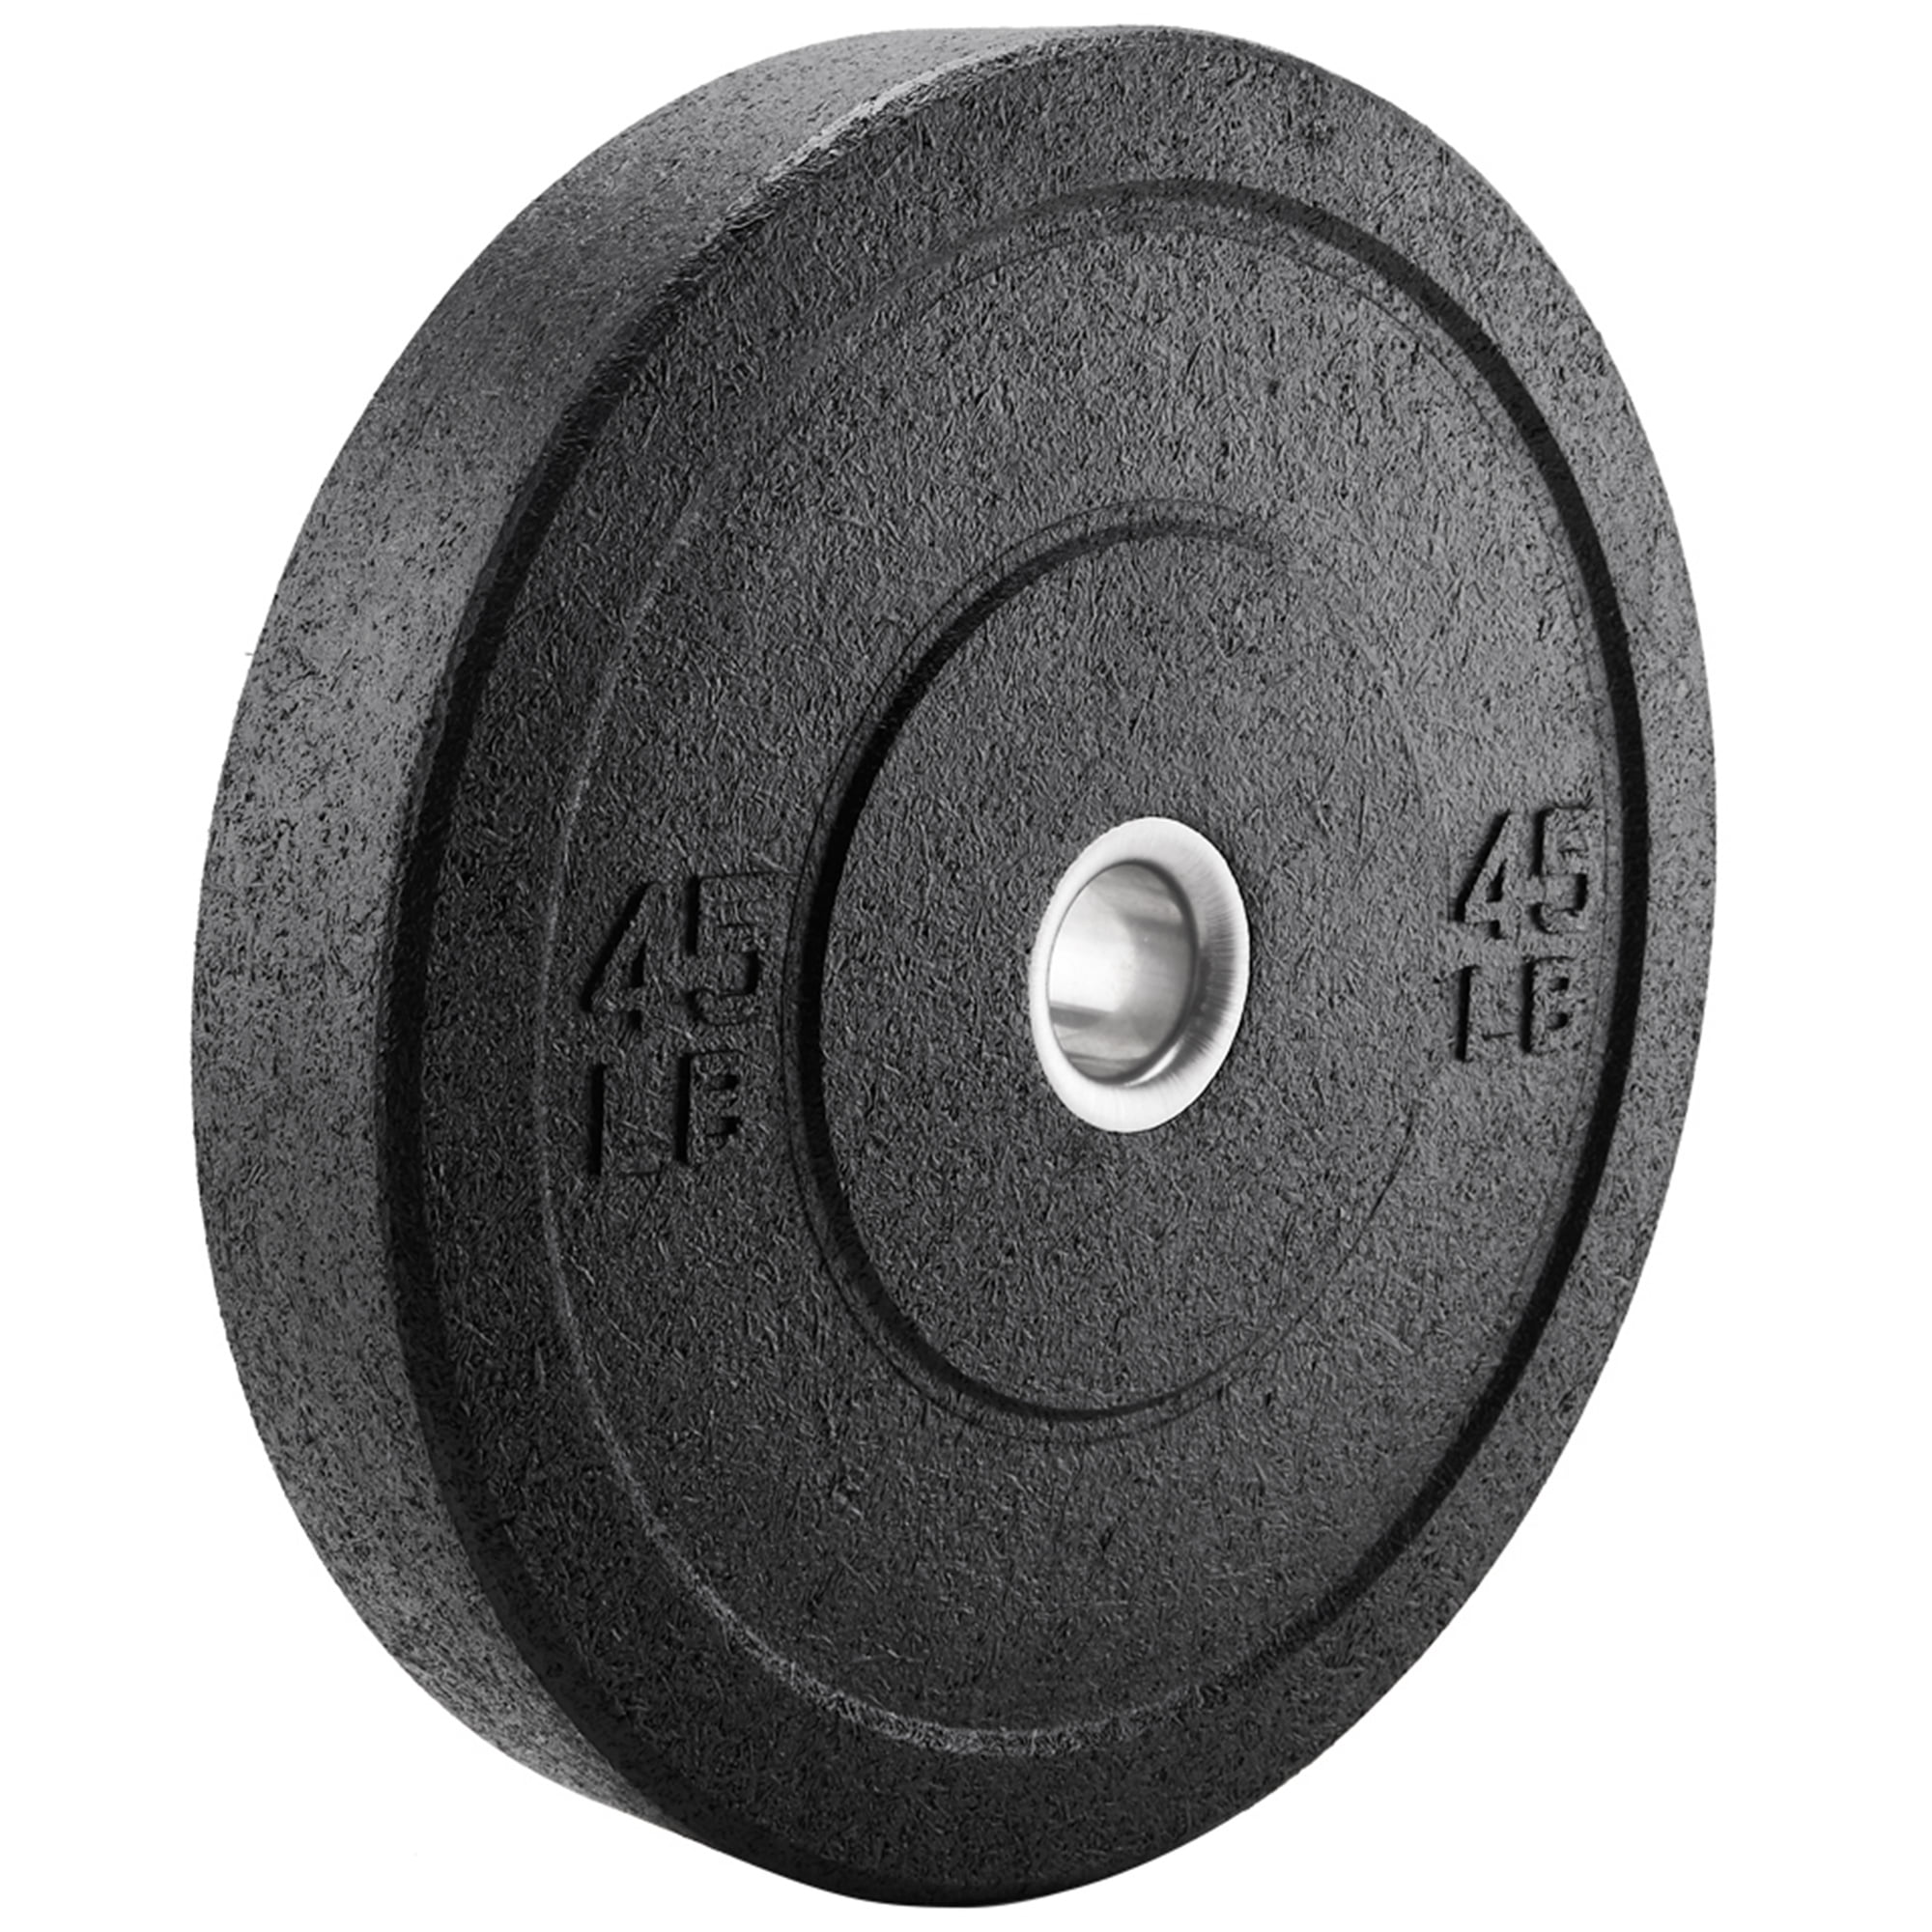 Zoomster Bumper Plate Olympic Weight Plate Bumper Weight Plate with Steel Insert Strength Training Weight Lifting Plate 